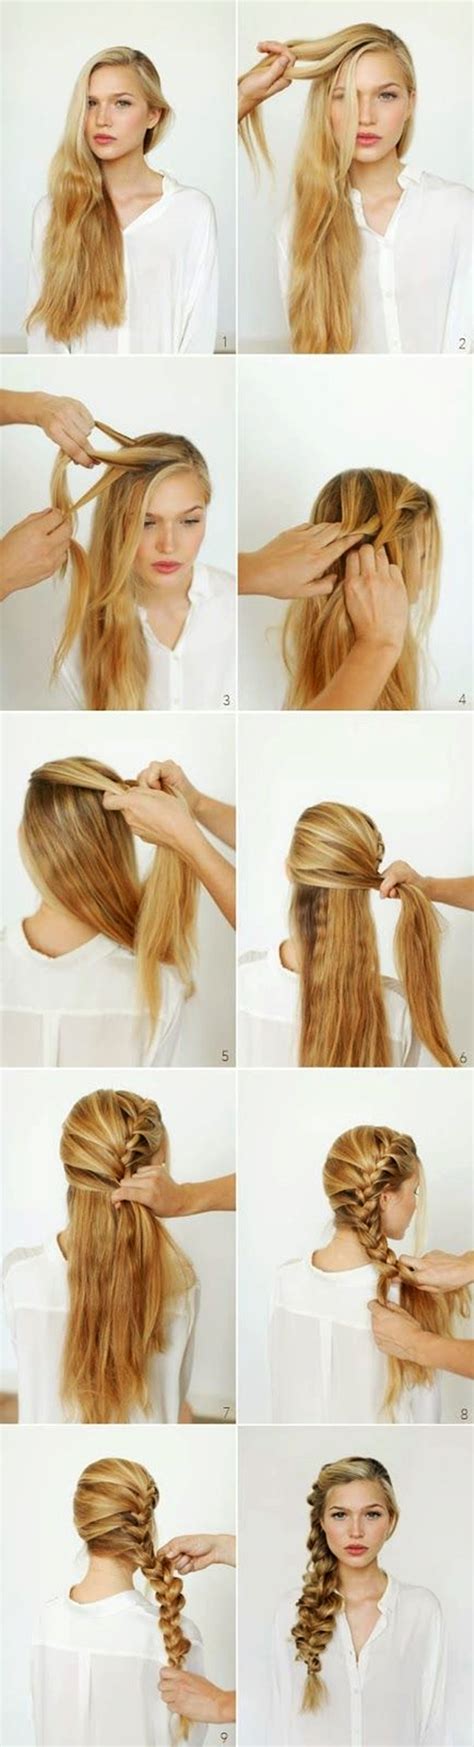 Easy Step By Step Hairstyles For Long Hair